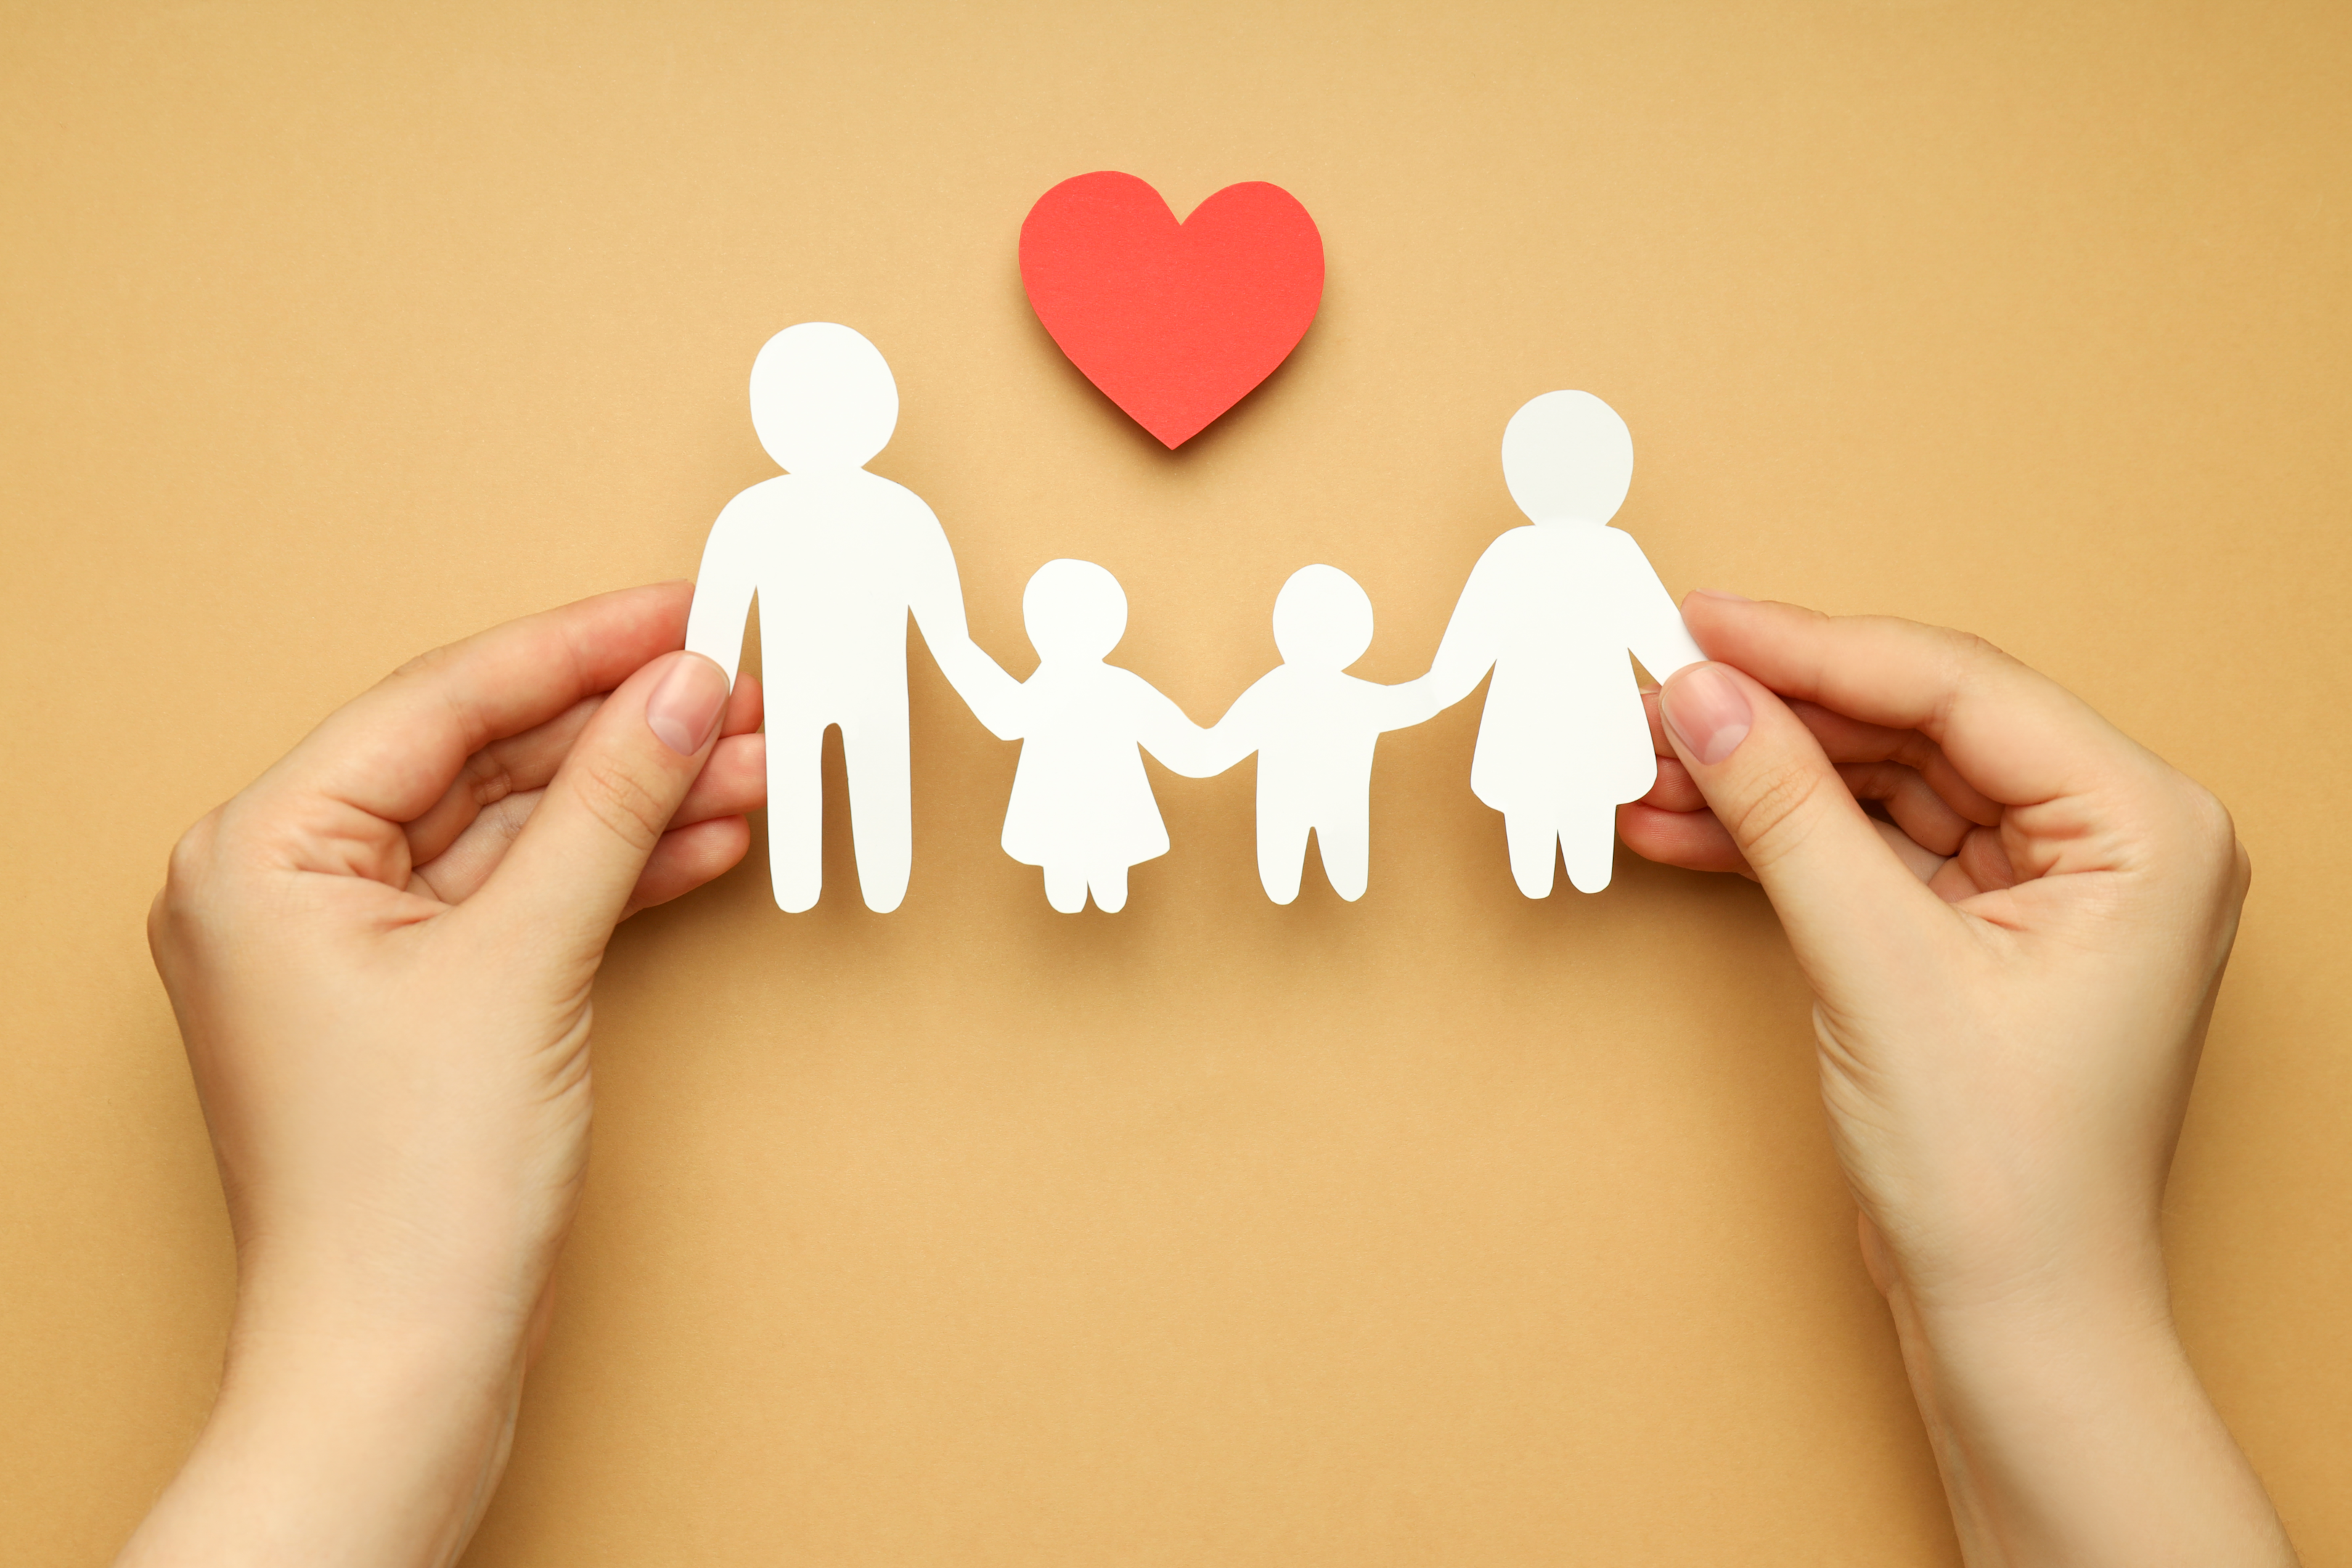 "Upholding family rights and protection under the California Family Rights Act (CFRA)."